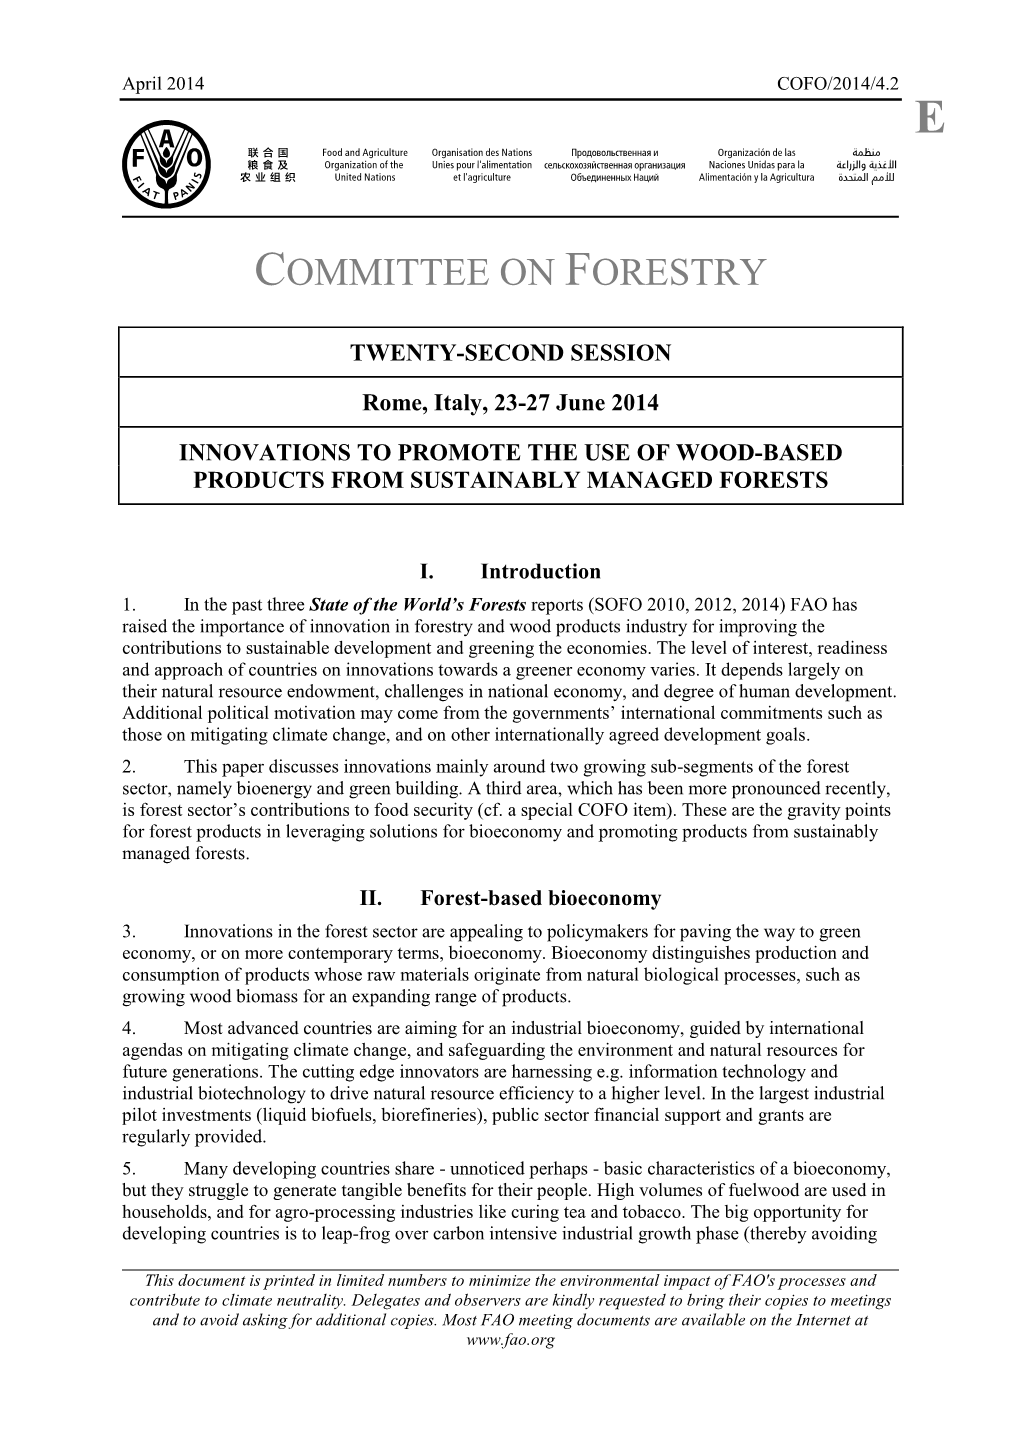 Committee on Forestry